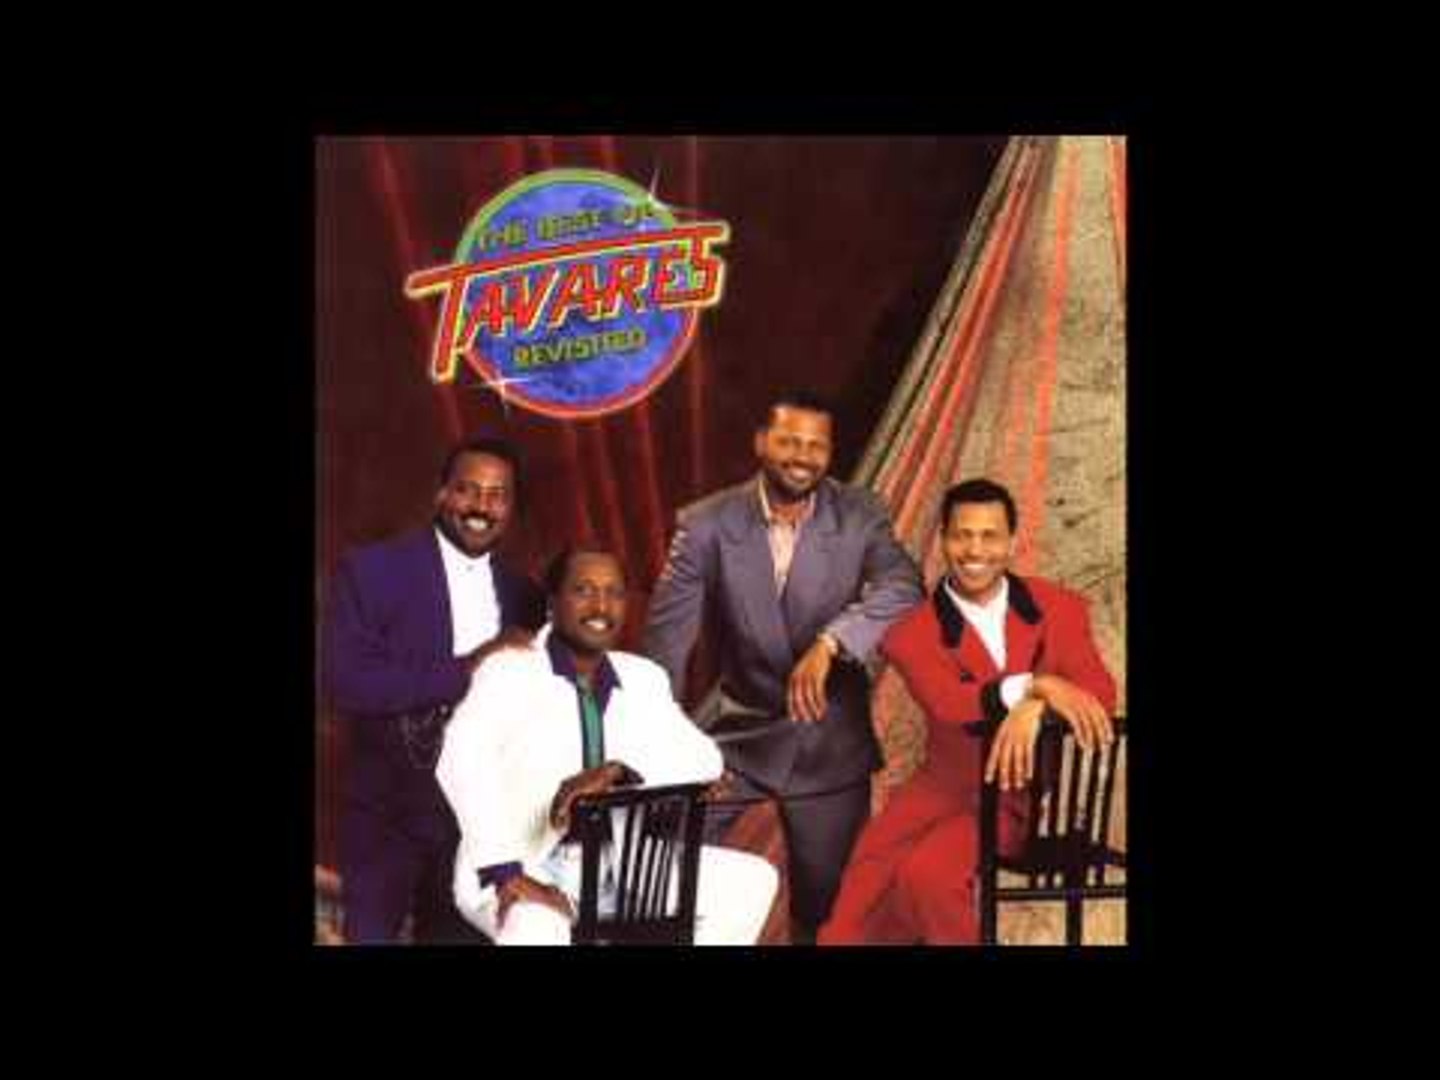 Tavares aka The Tavares Brothers are an American R&B, funk and